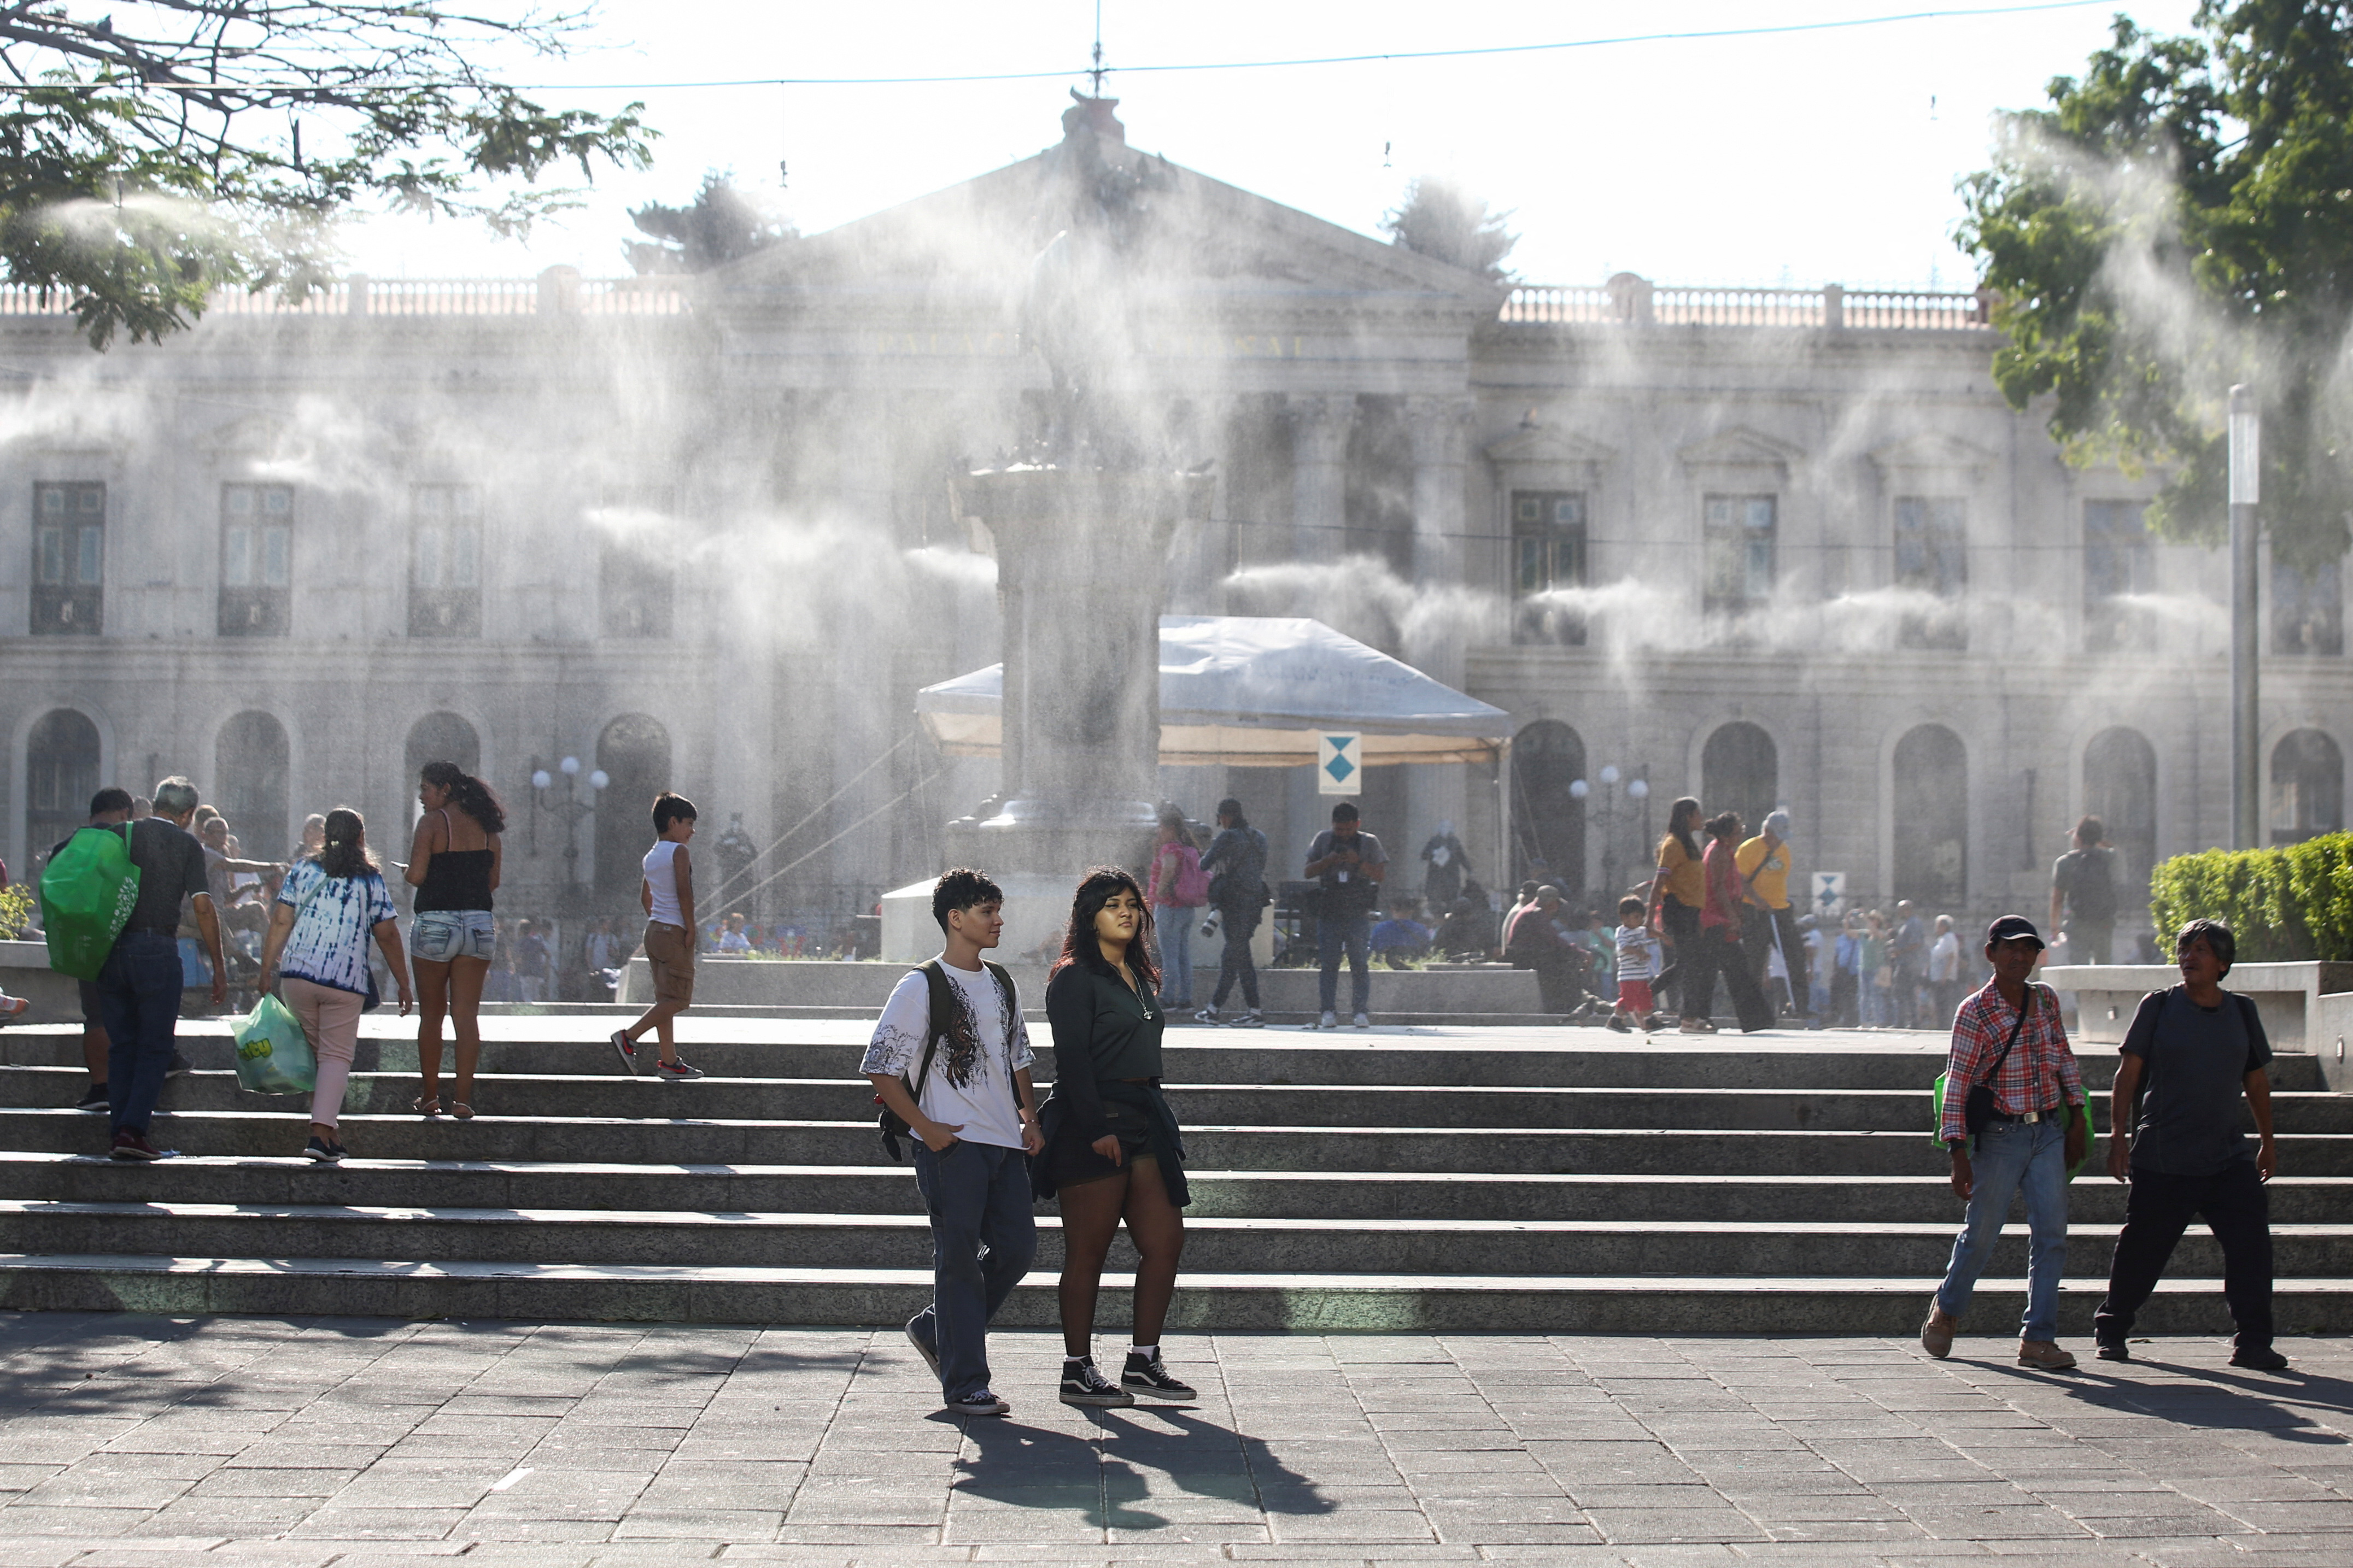 Water is sprayed by a system to alleviate the high temperatures, in San Salvador